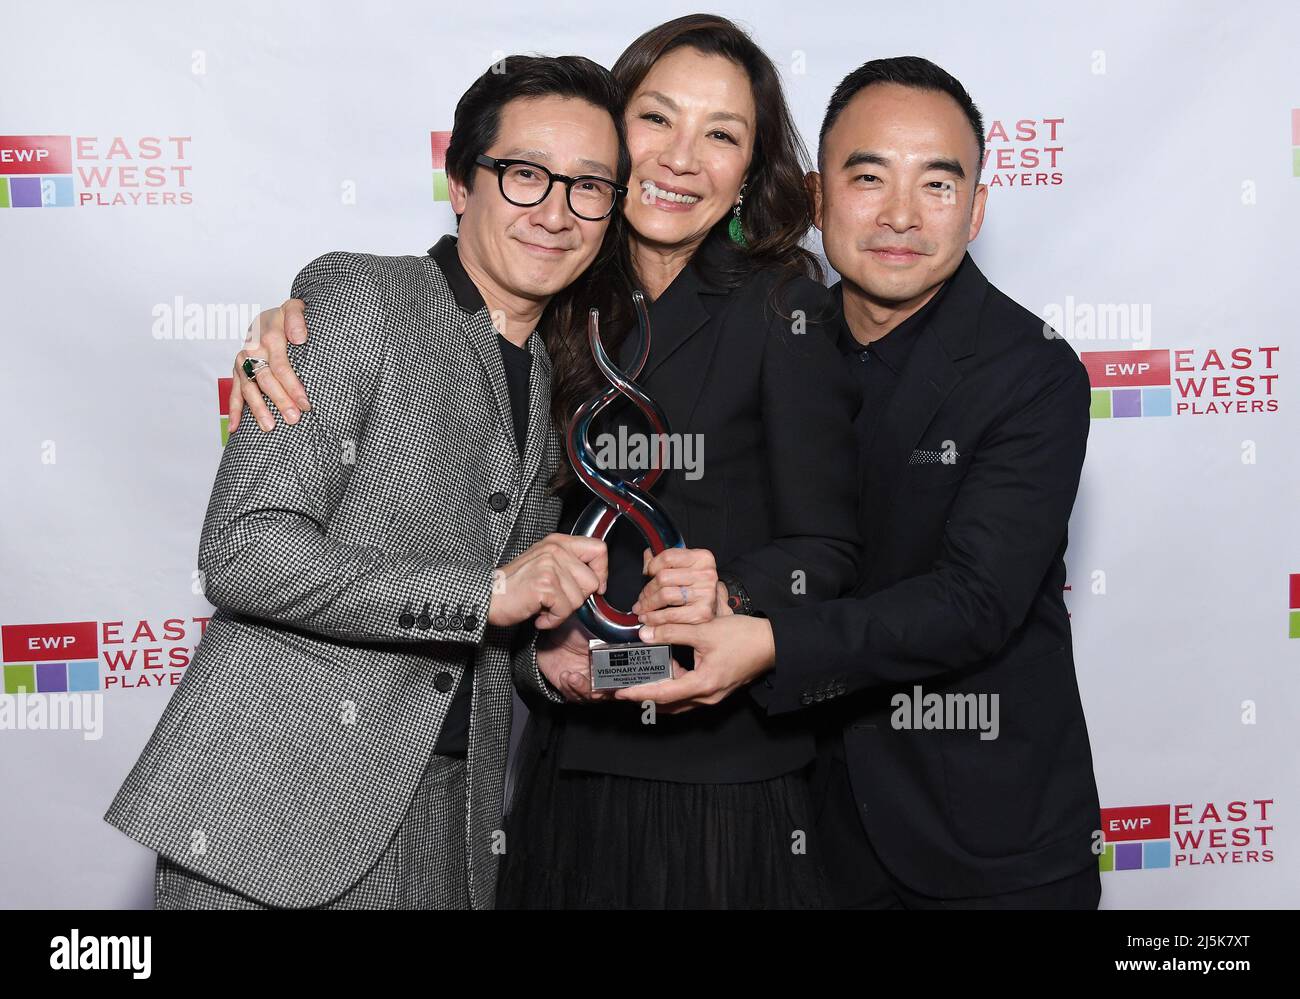 Los Angeles, USA. 23. April 2022. (L-R) Ke Huy Quan, East West Players Visionary Award Honoree Michelle Yeoh und Melvin Mar bei den East West Players 56. Anniversary Visionary Awards, die am Samstag, dem 23. April 2022, im City Market Social House in Los Angeles, CA, verliehen wurden. (Foto: Sthanlee B. Mirador/Sipa USA) Quelle: SIPA USA/Alamy Live News Stockfoto